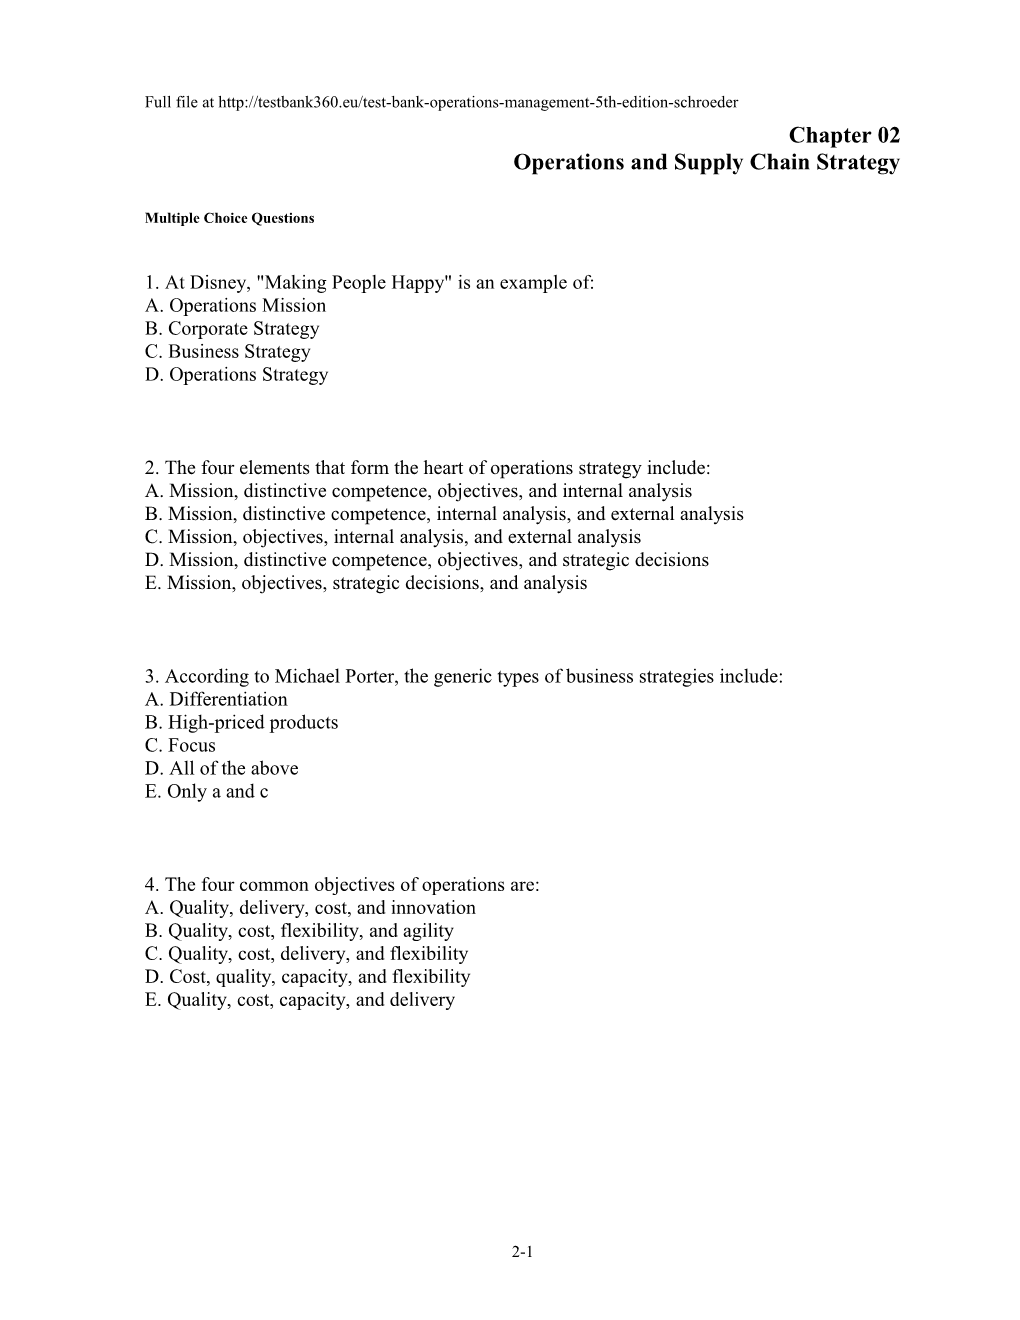 Chapter 02 Operations and Supply Chain Strategy